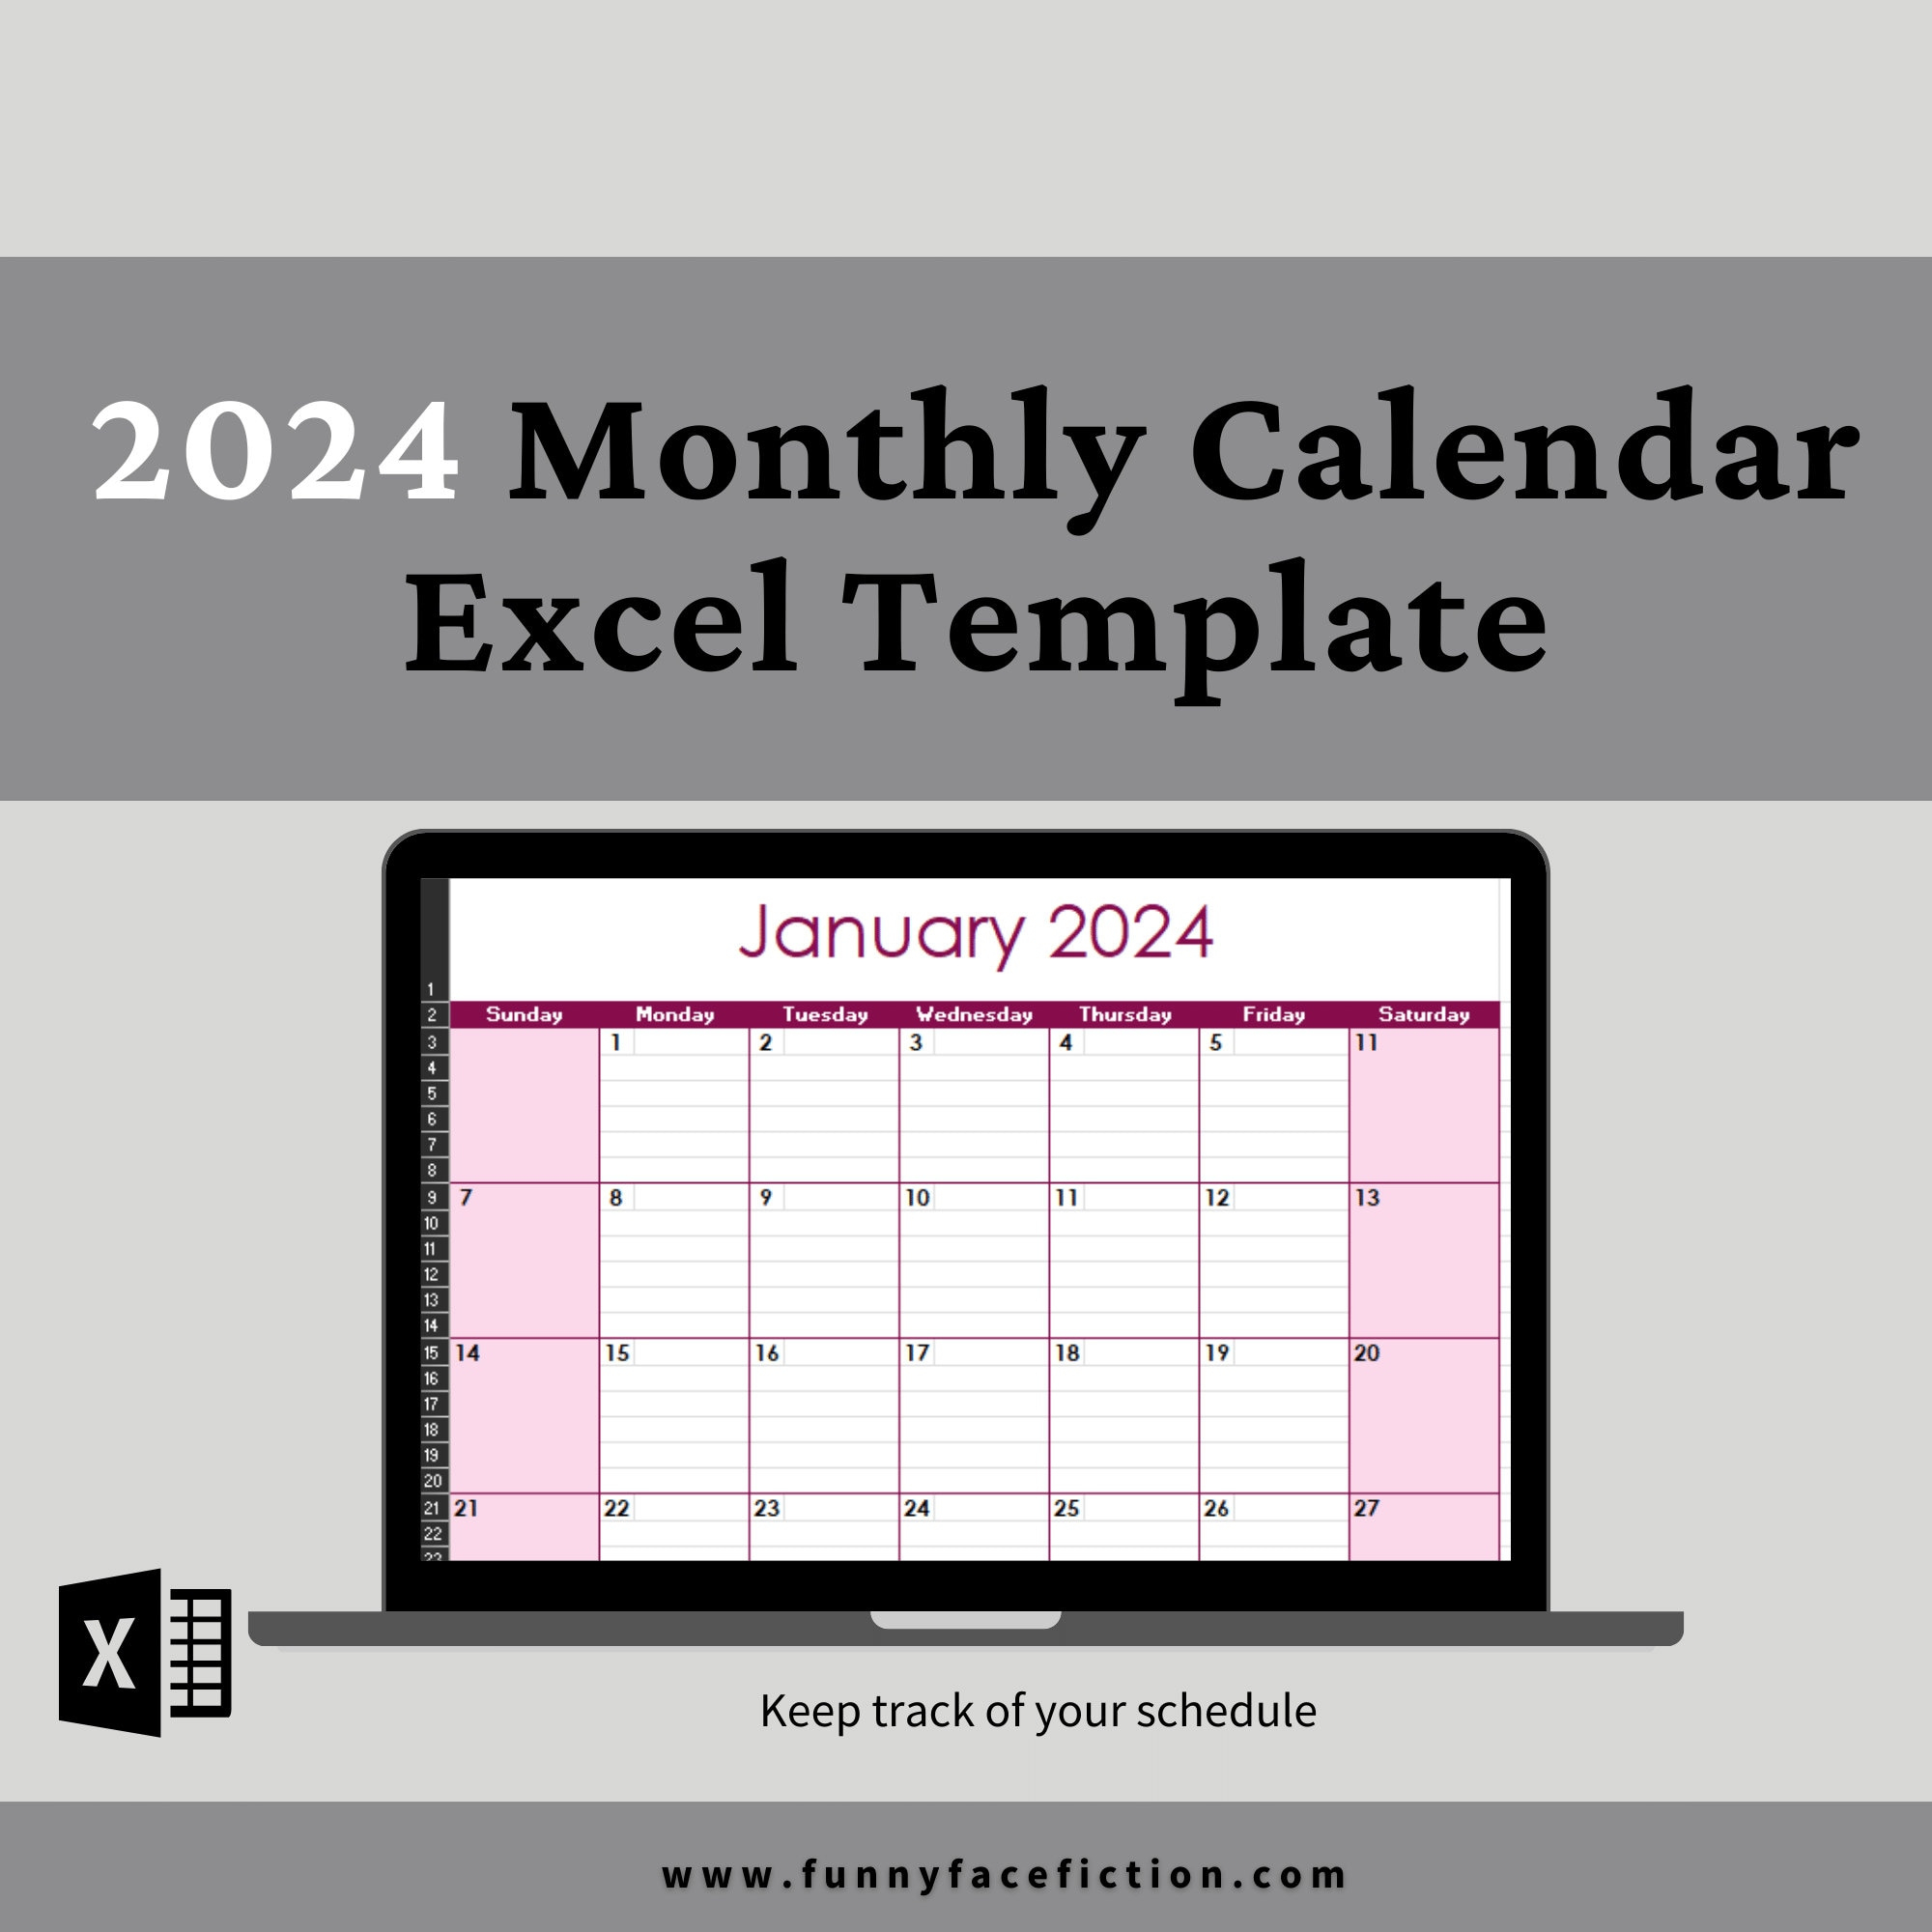 2024 Monthly Calendar Template Excel Monthly Calendar Template - Etsy | Printable Calendar 2024 Monthly Excel